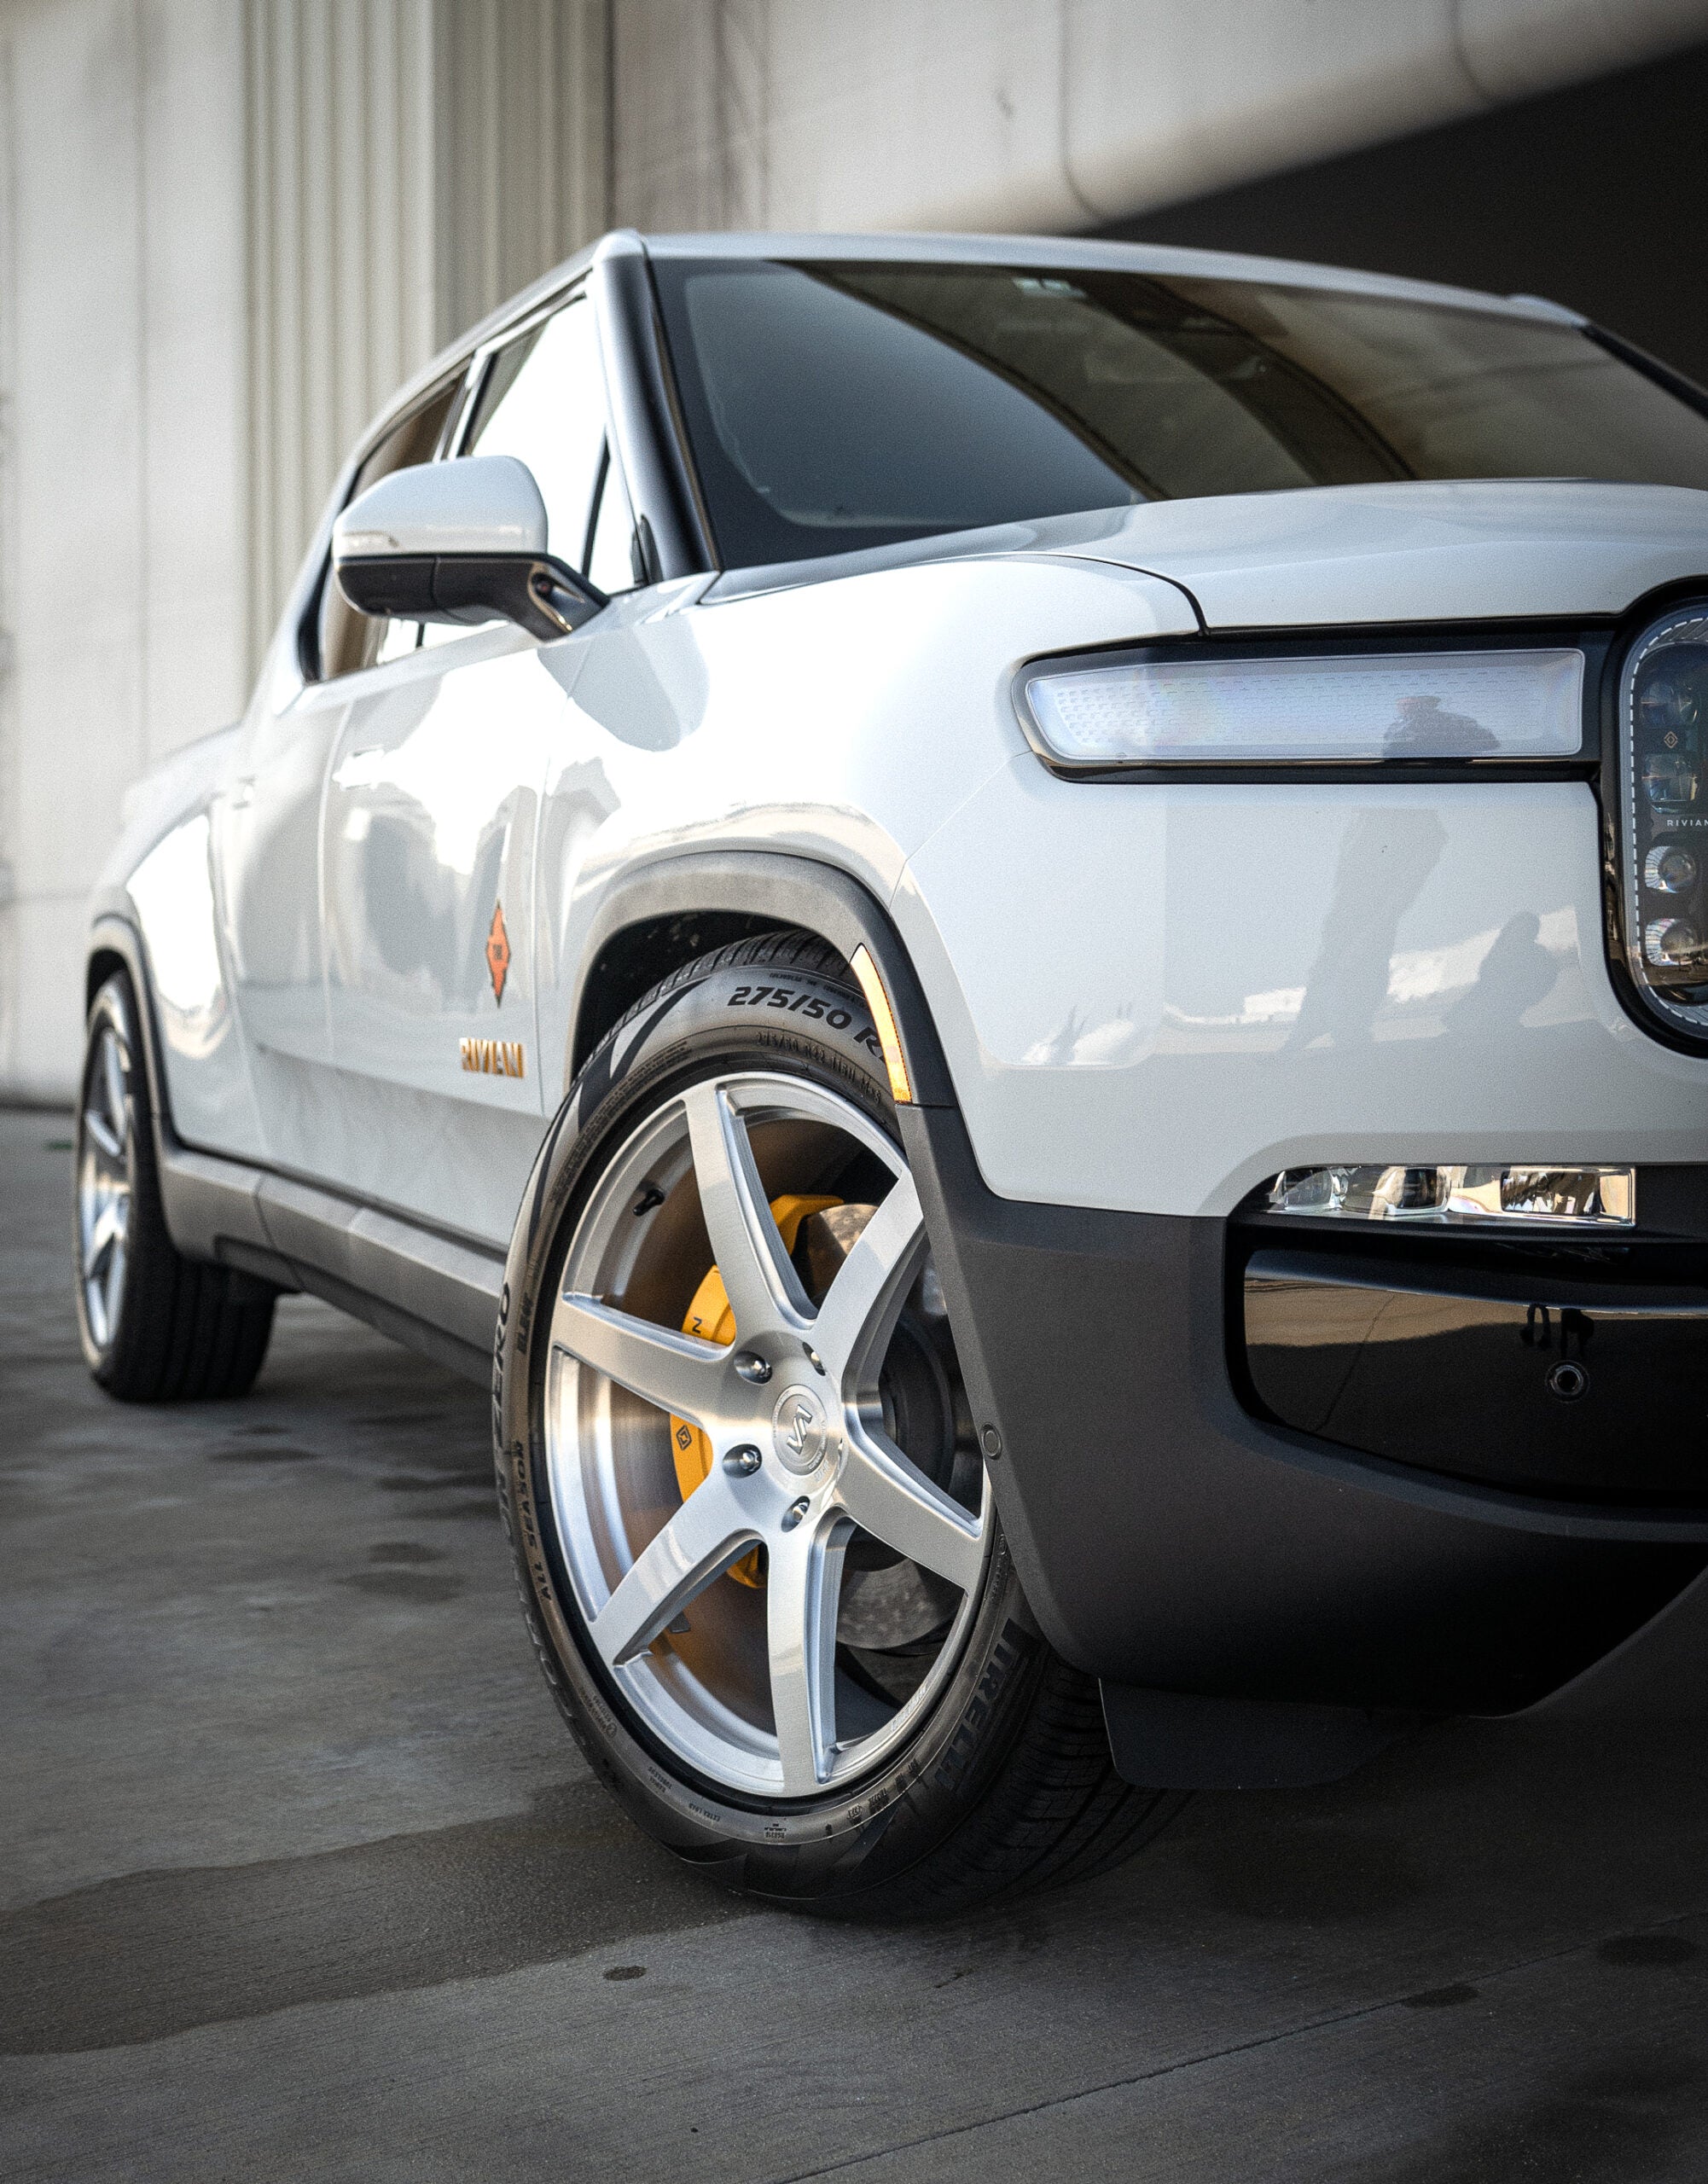 Buy satin-black Variant SXX-1P Sport Wheels for Rivian R1T and R1S